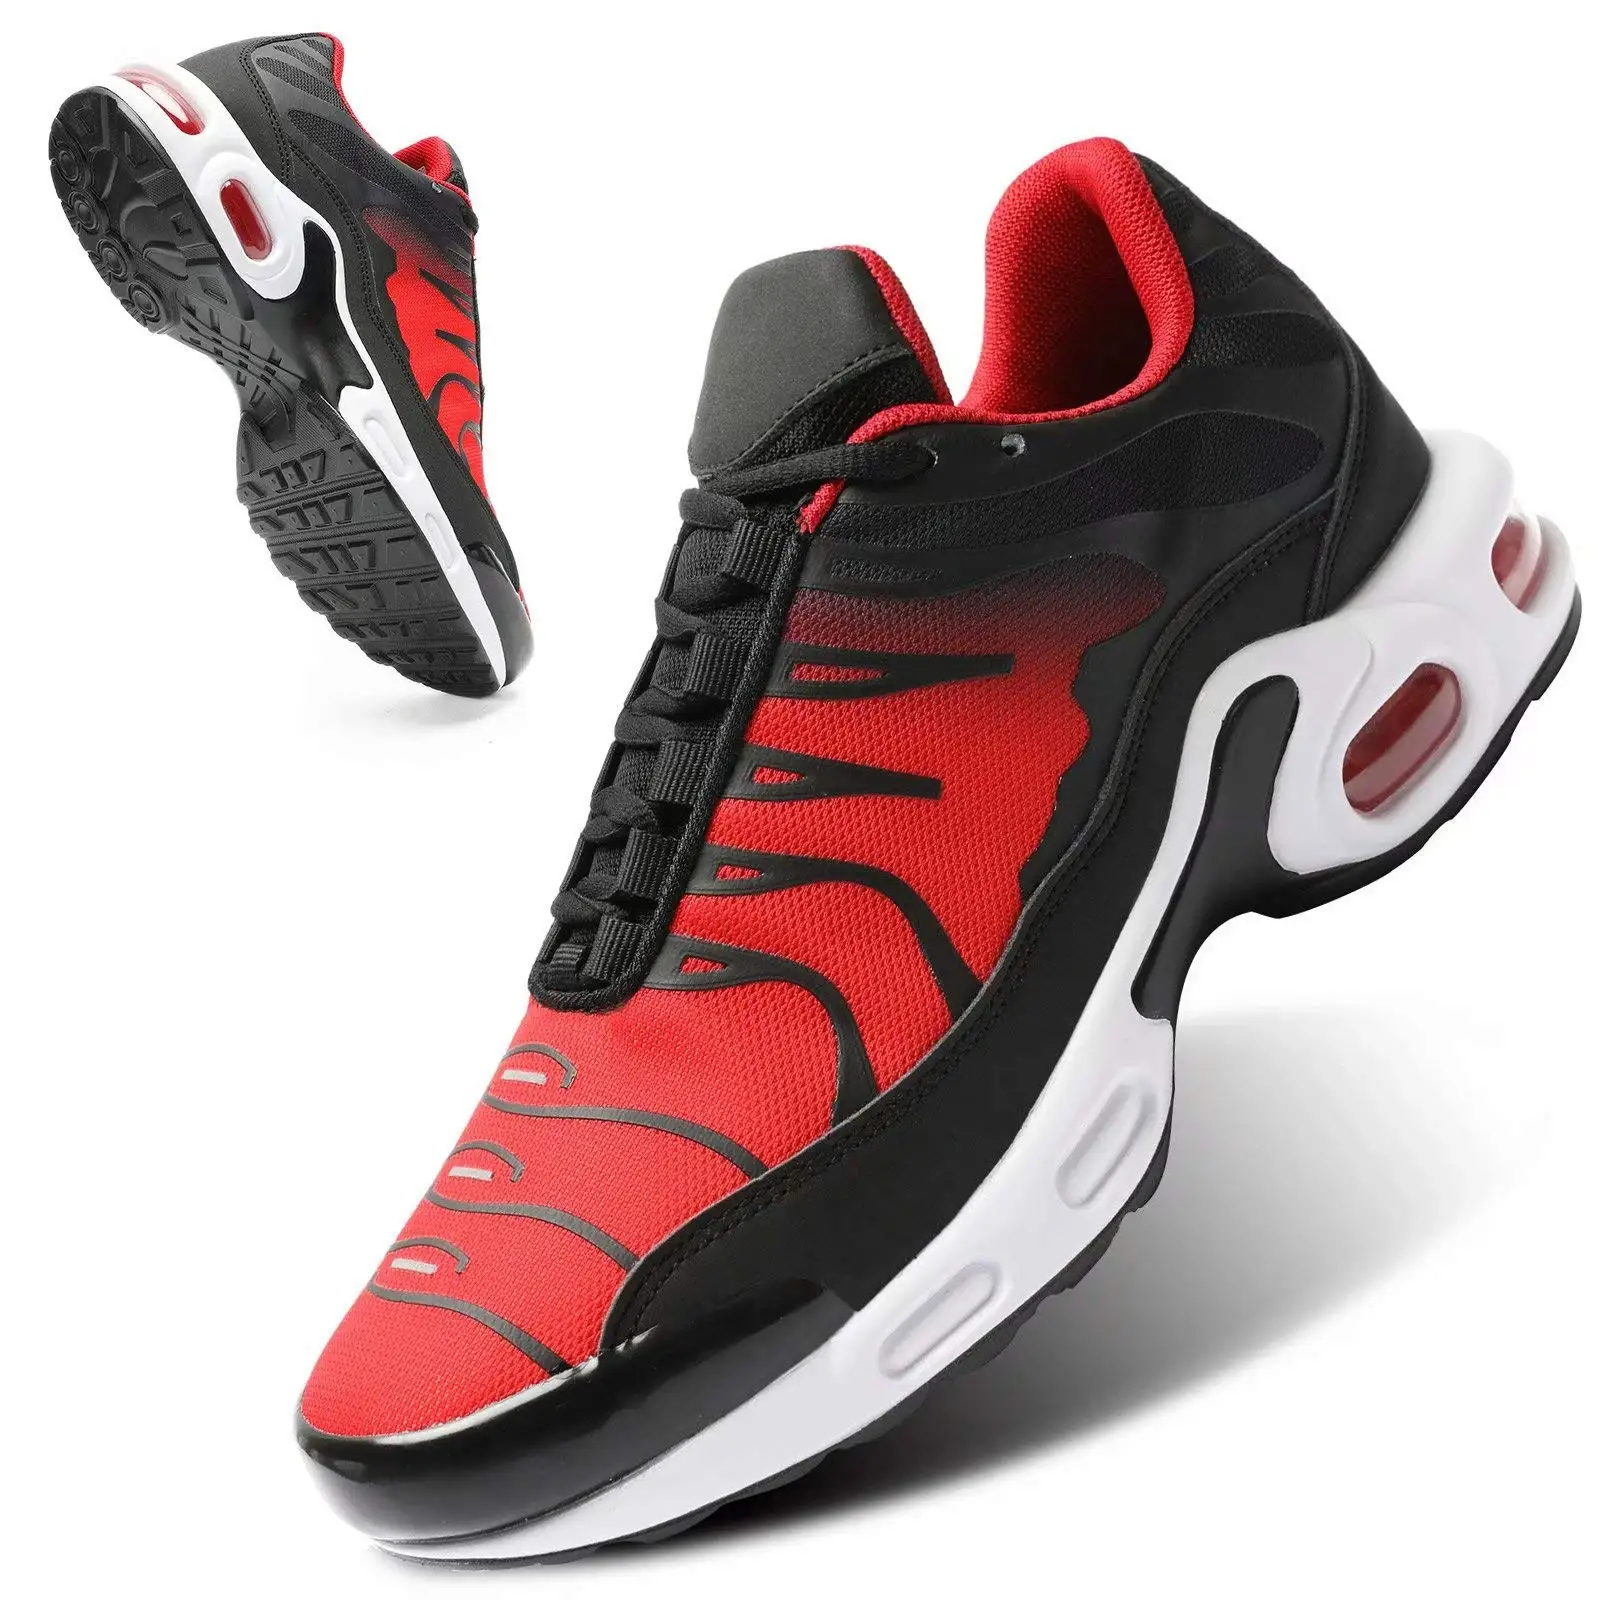 PU outsole mesh breathable high quality running shoes men"e;s air cushion sports shoes